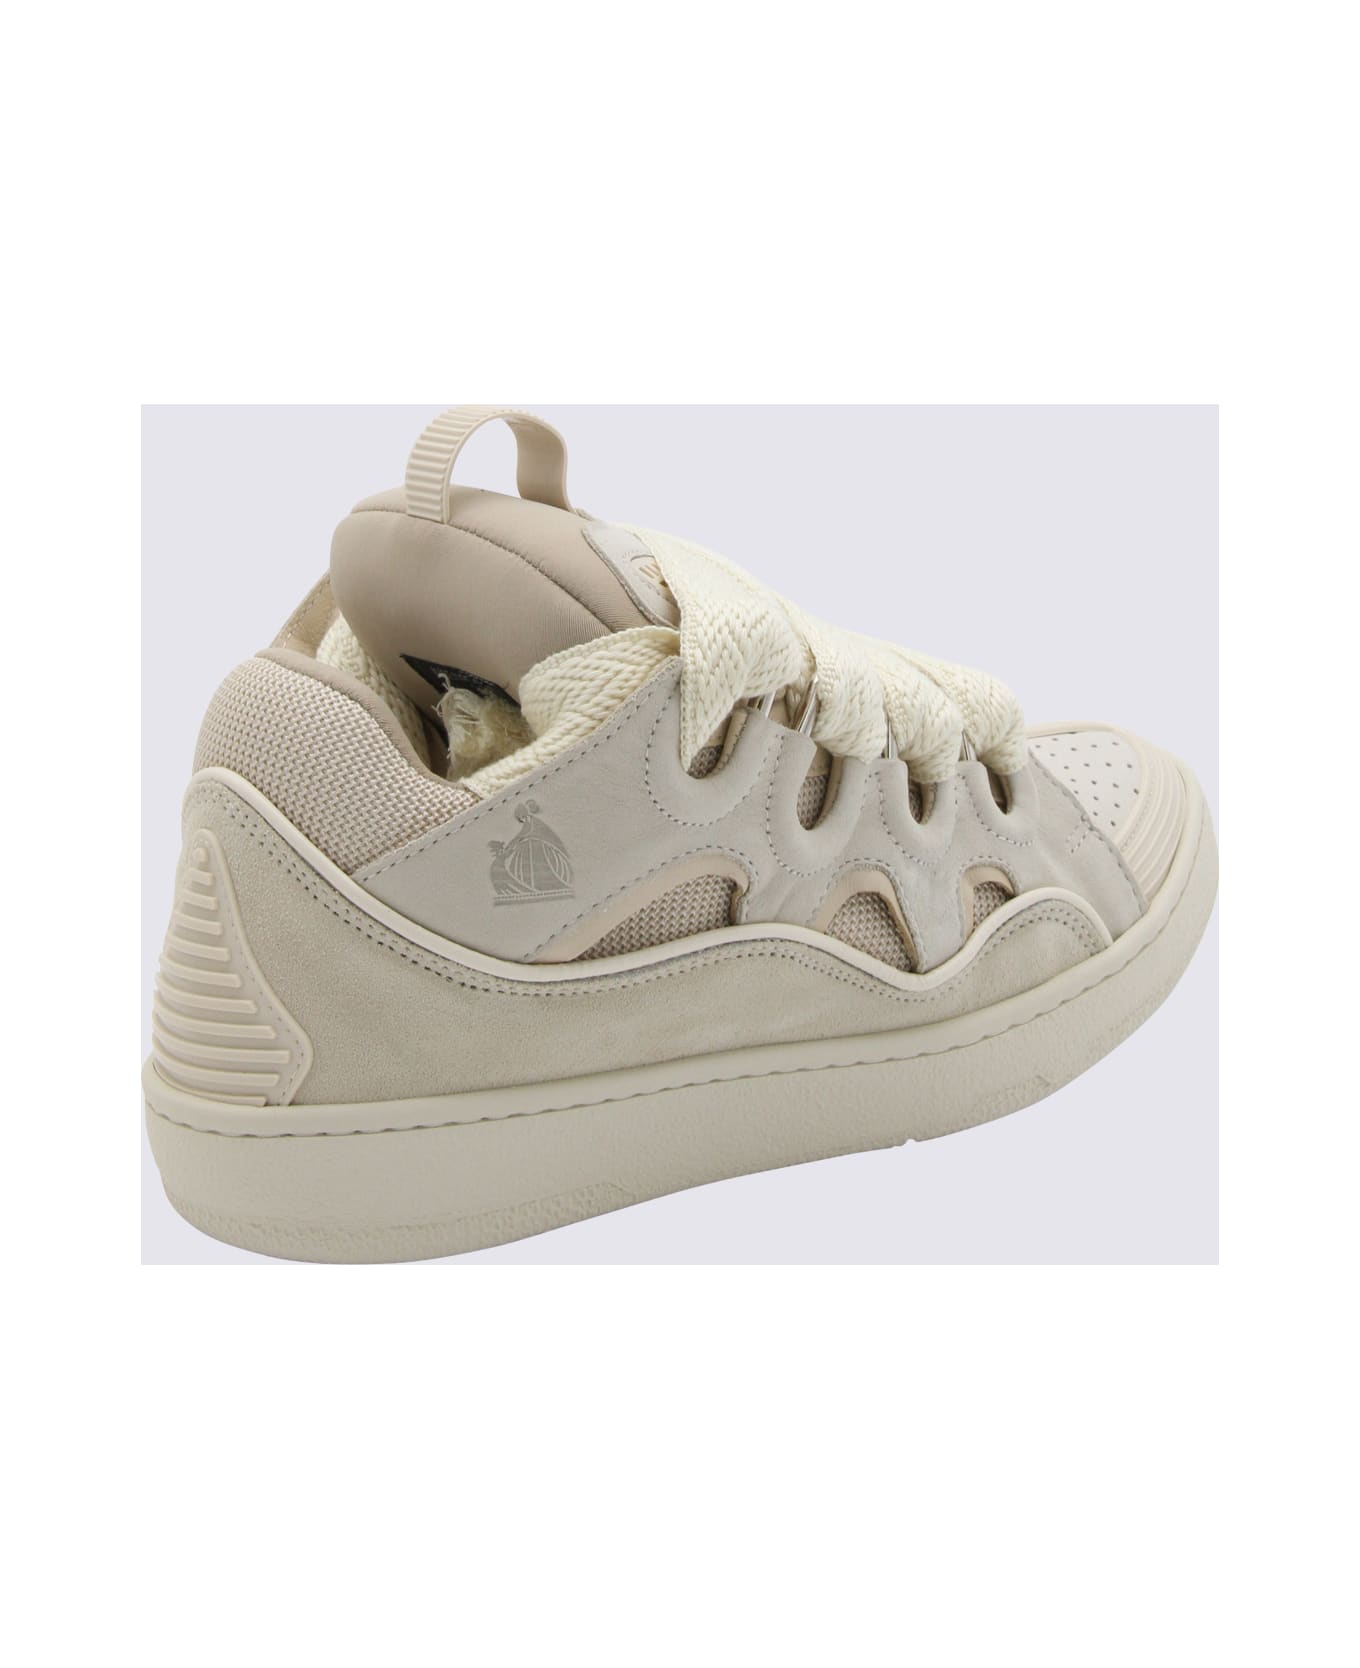 Lanvin White Leather Curb Sneakers - PEACH スニーカー